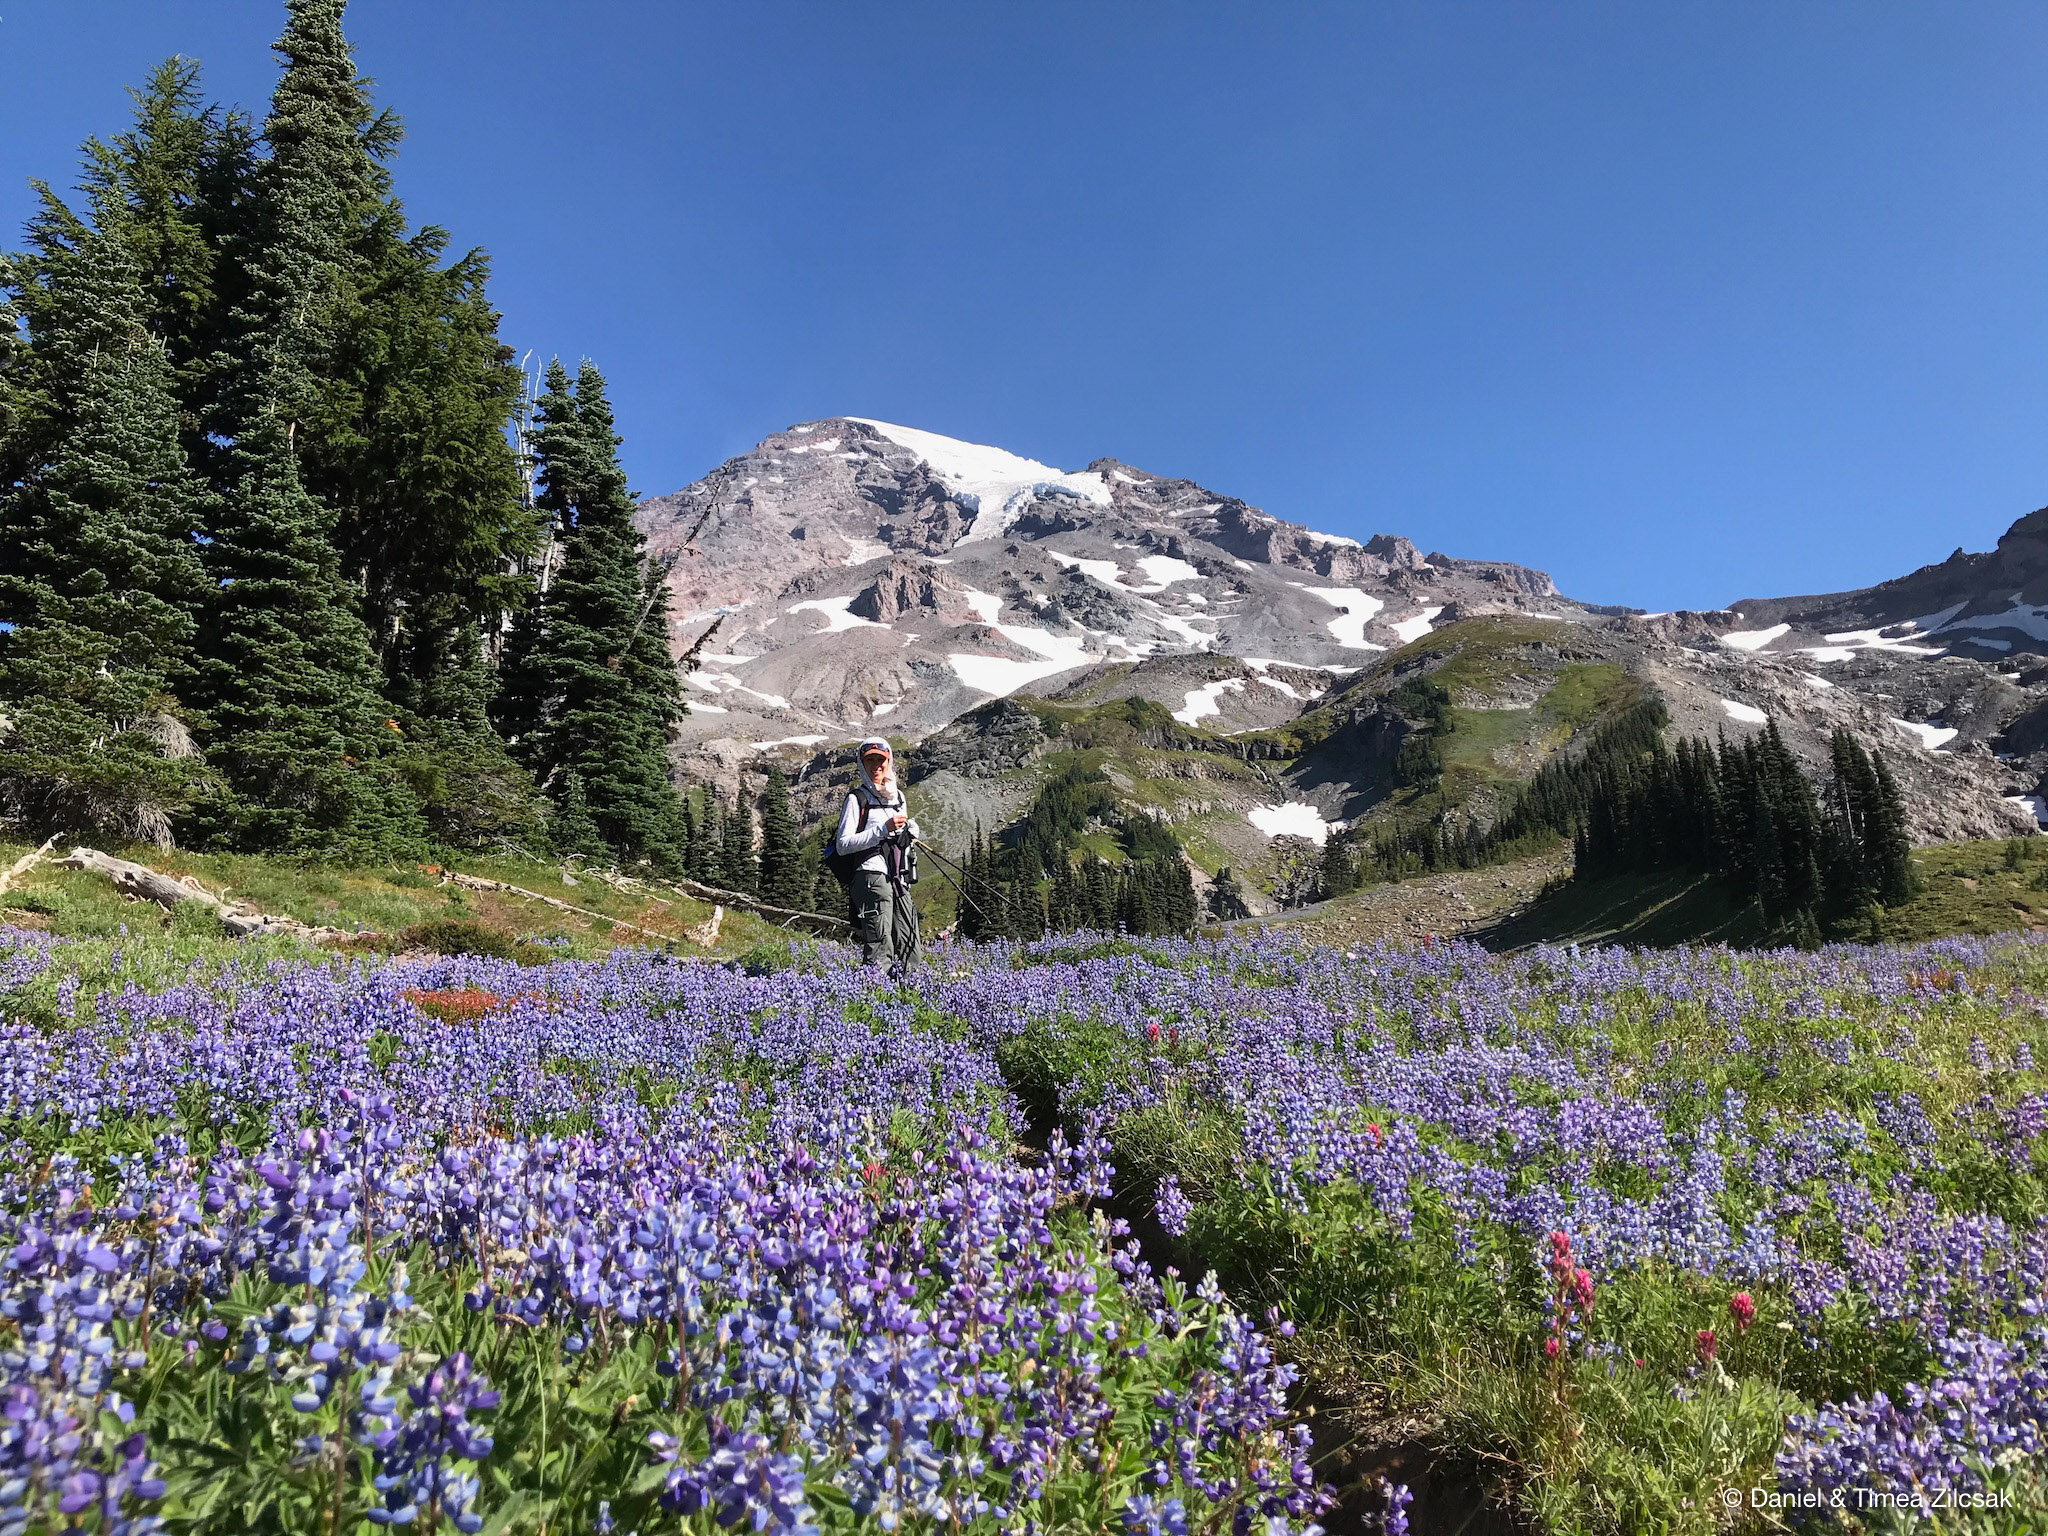 View of Kautz Glacier of Mount Rainier from Van Trump Park, with millions of lupins in the foreground